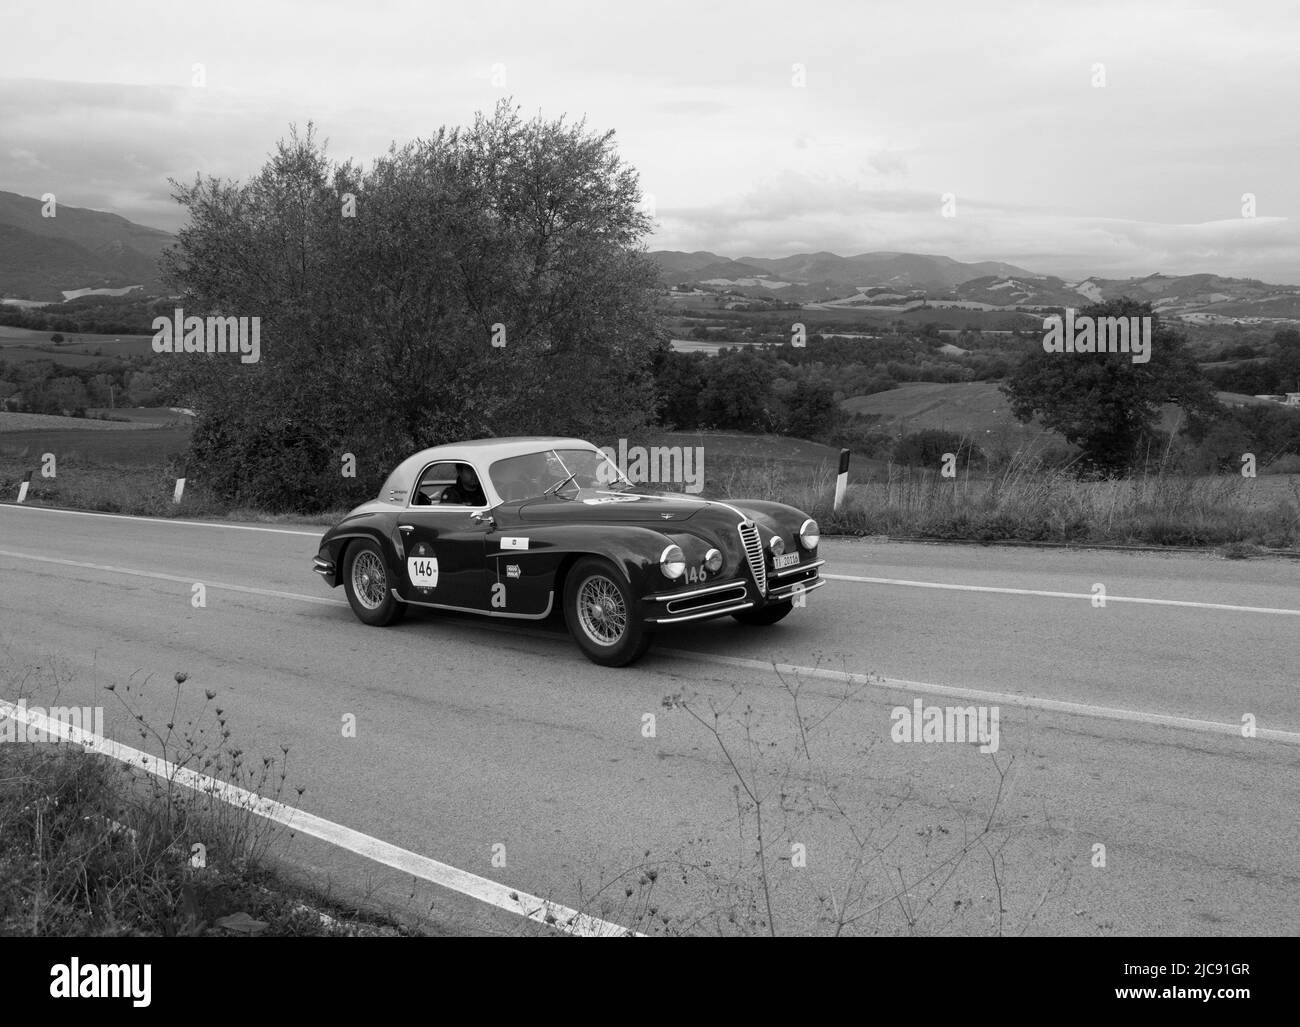 CAGLI , ITALY - OTT 24 - 2020 : ALFA ROMEO 6C 2500 SUPER SPORT 1949 on an old racing car in rally Mille Miglia 2020 the famous italian historical race Stock Photo